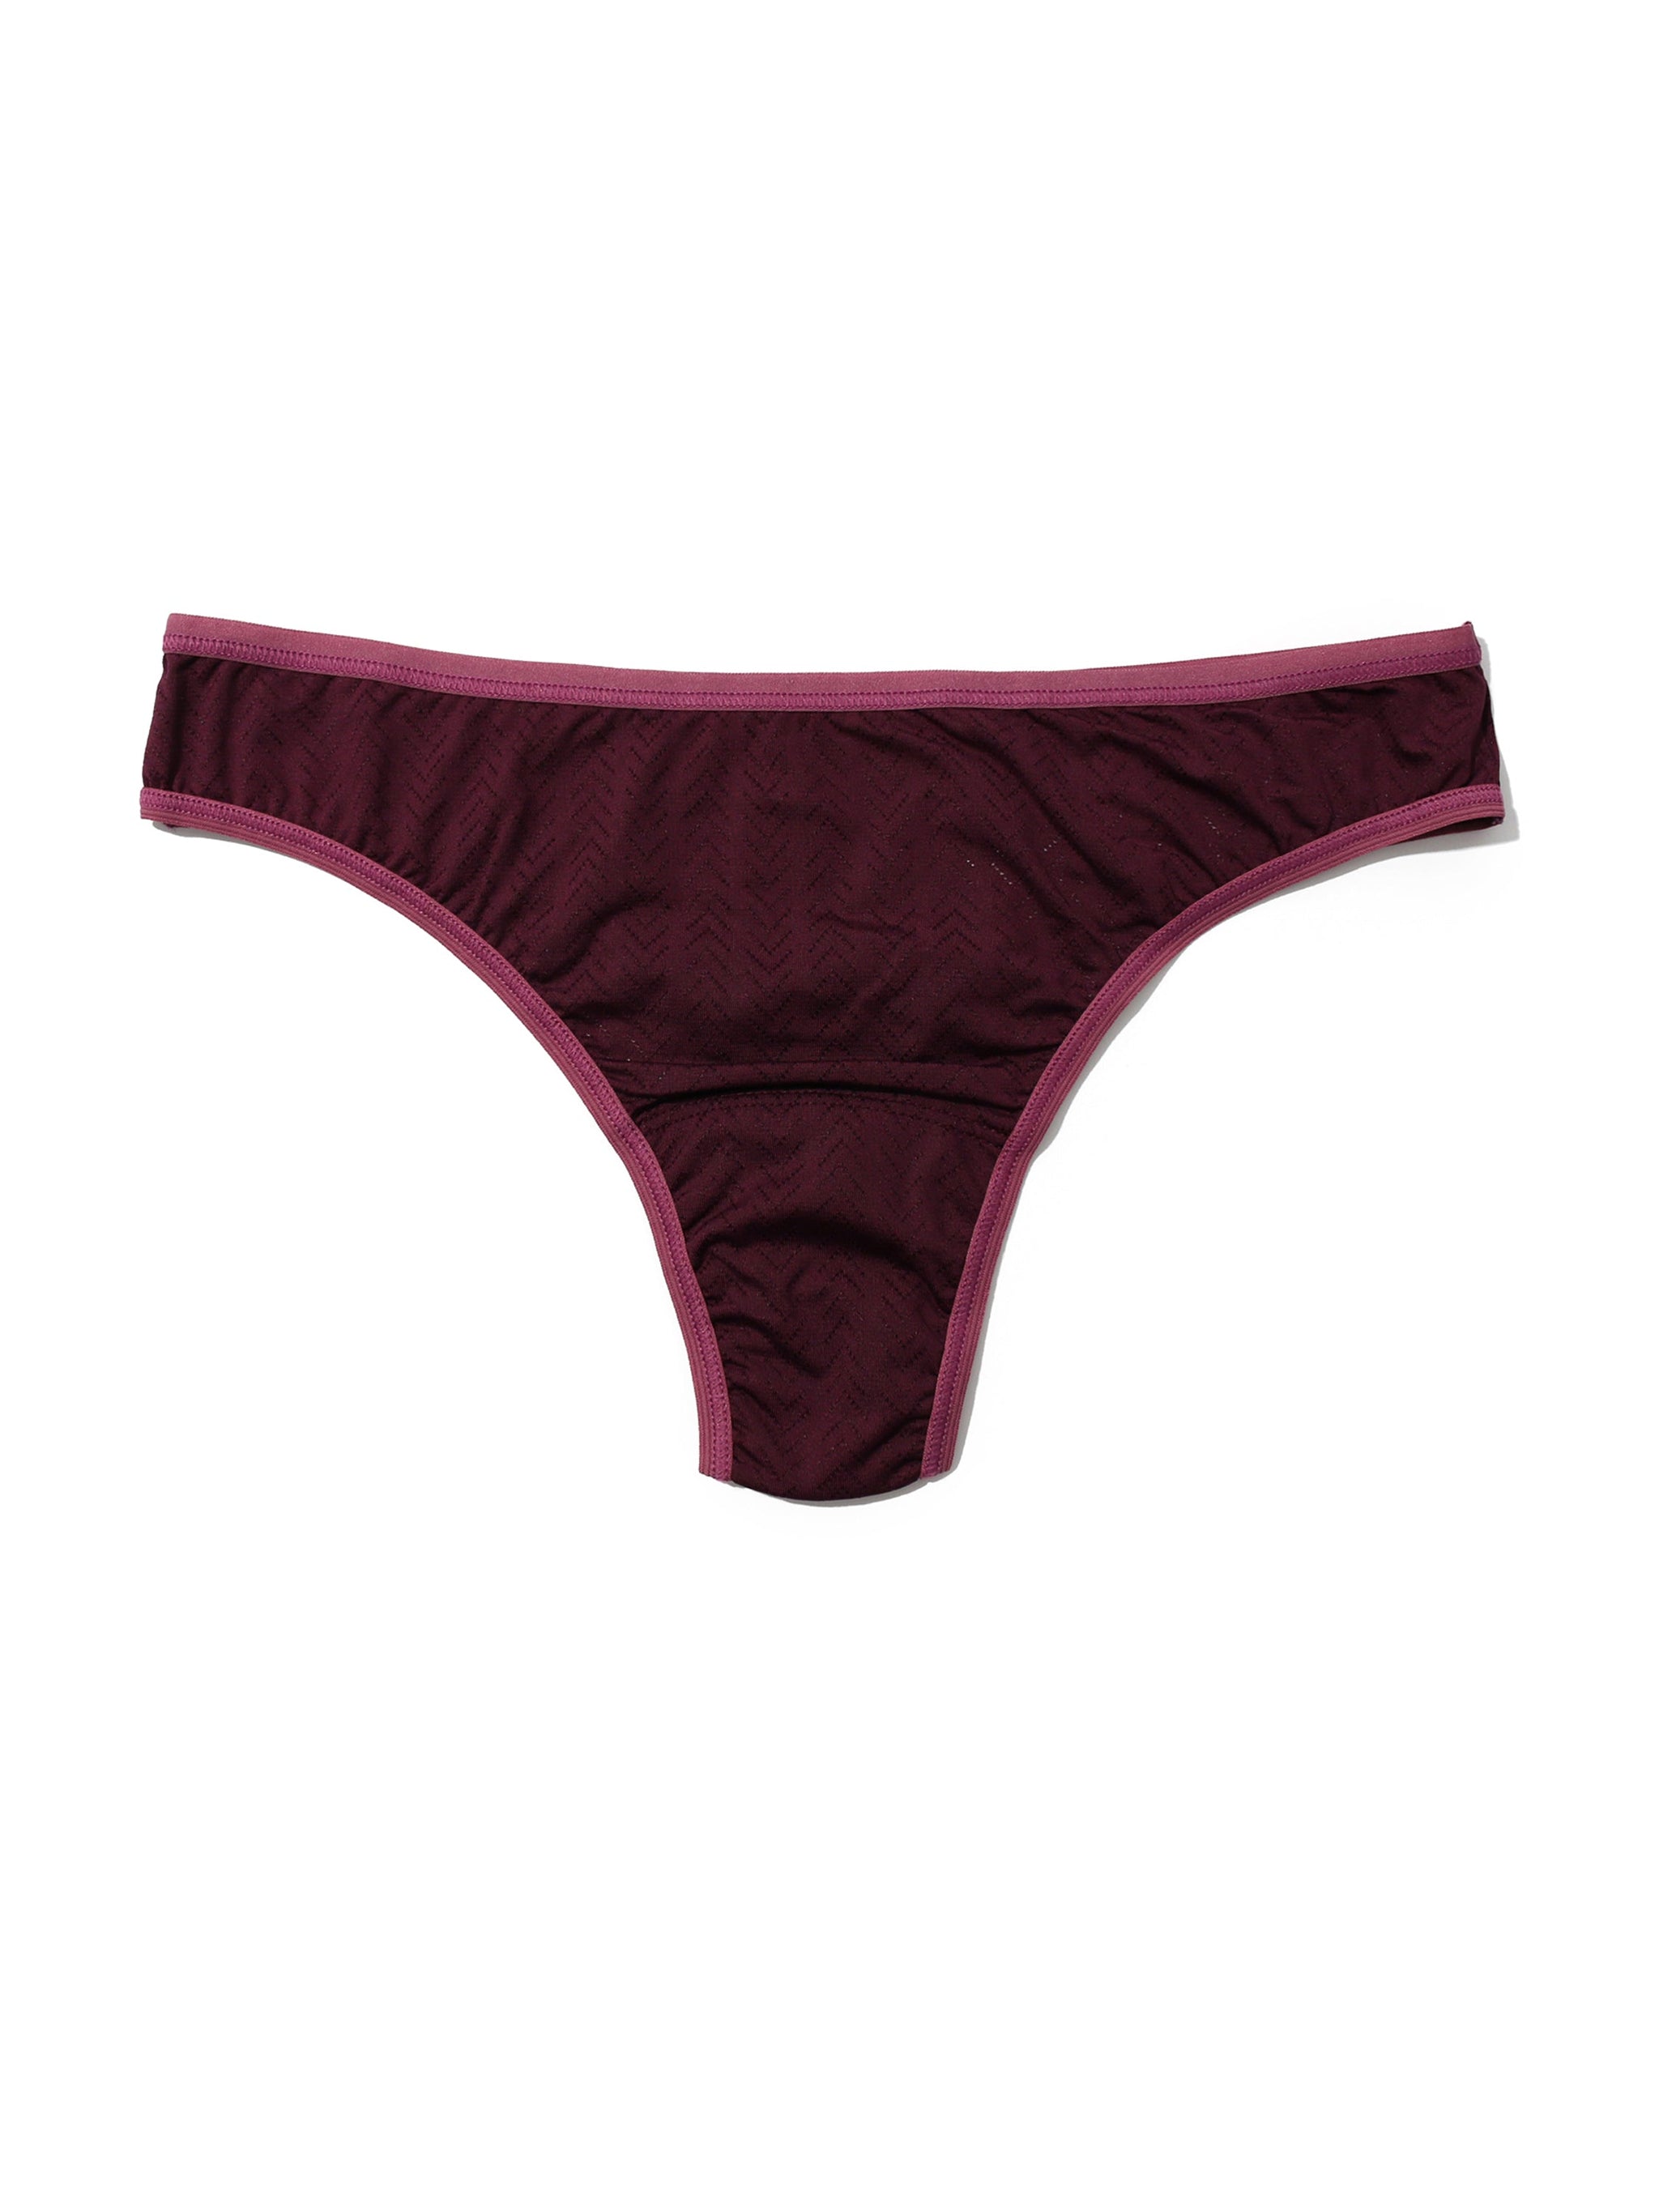 Subset Organic Cotton Low-Rise Thong: Available in sizes 2XS-3XL